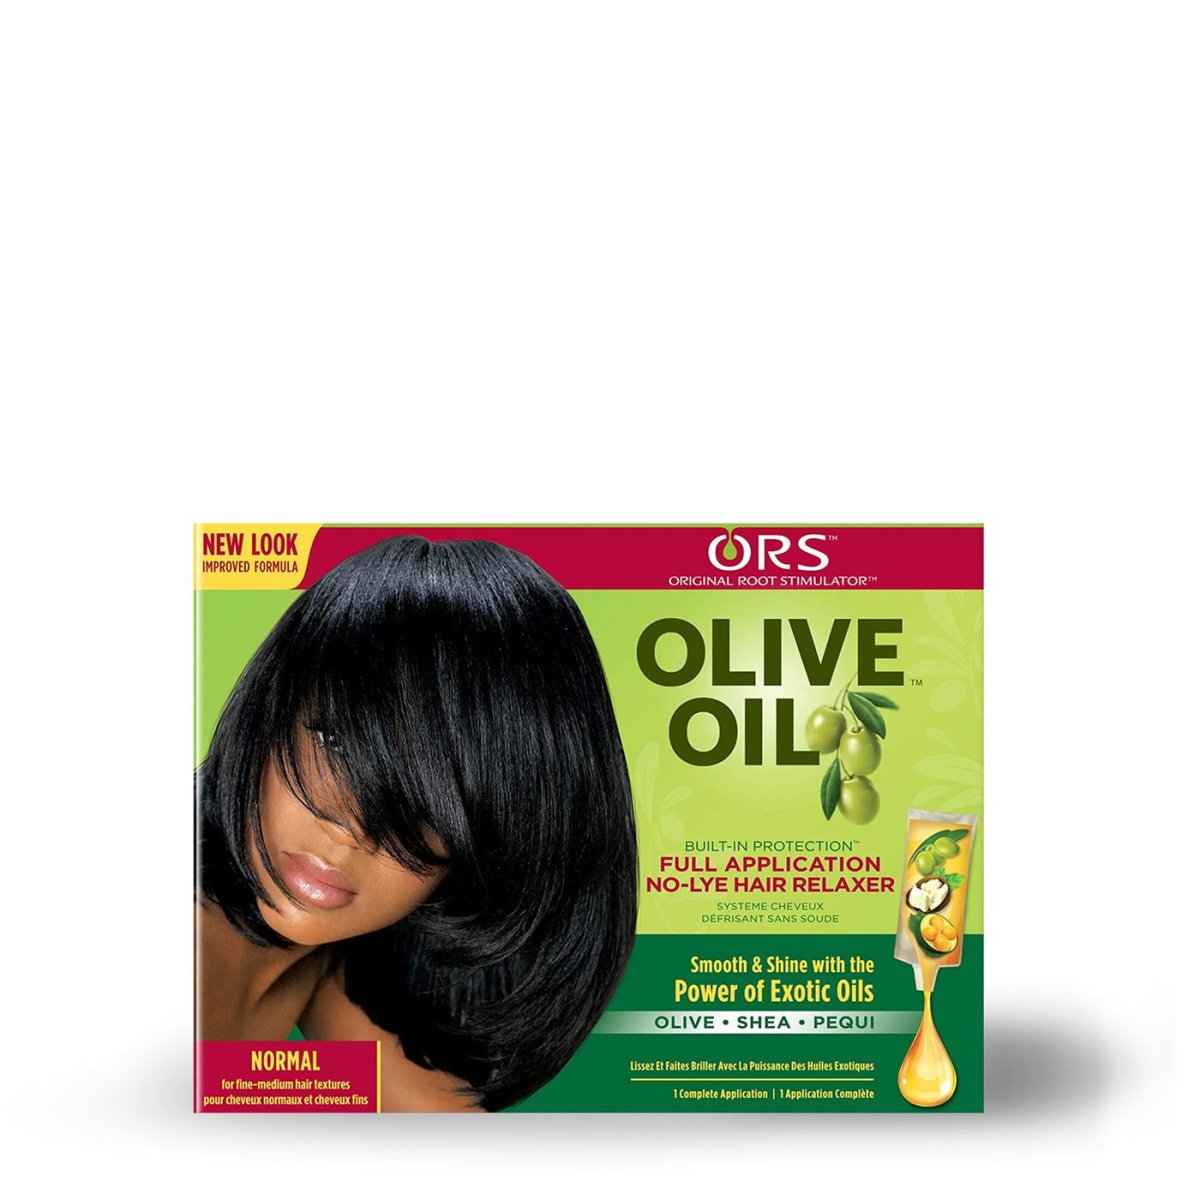 ORS Olive Oil No Lye Hair Relaxer System - Southwestsix Cosmetics ORS Olive Oil No Lye Hair Relaxer System Hair Relaxer ORS Southwestsix Cosmetics Extra Strength ORS Olive Oil No Lye Hair Relaxer System